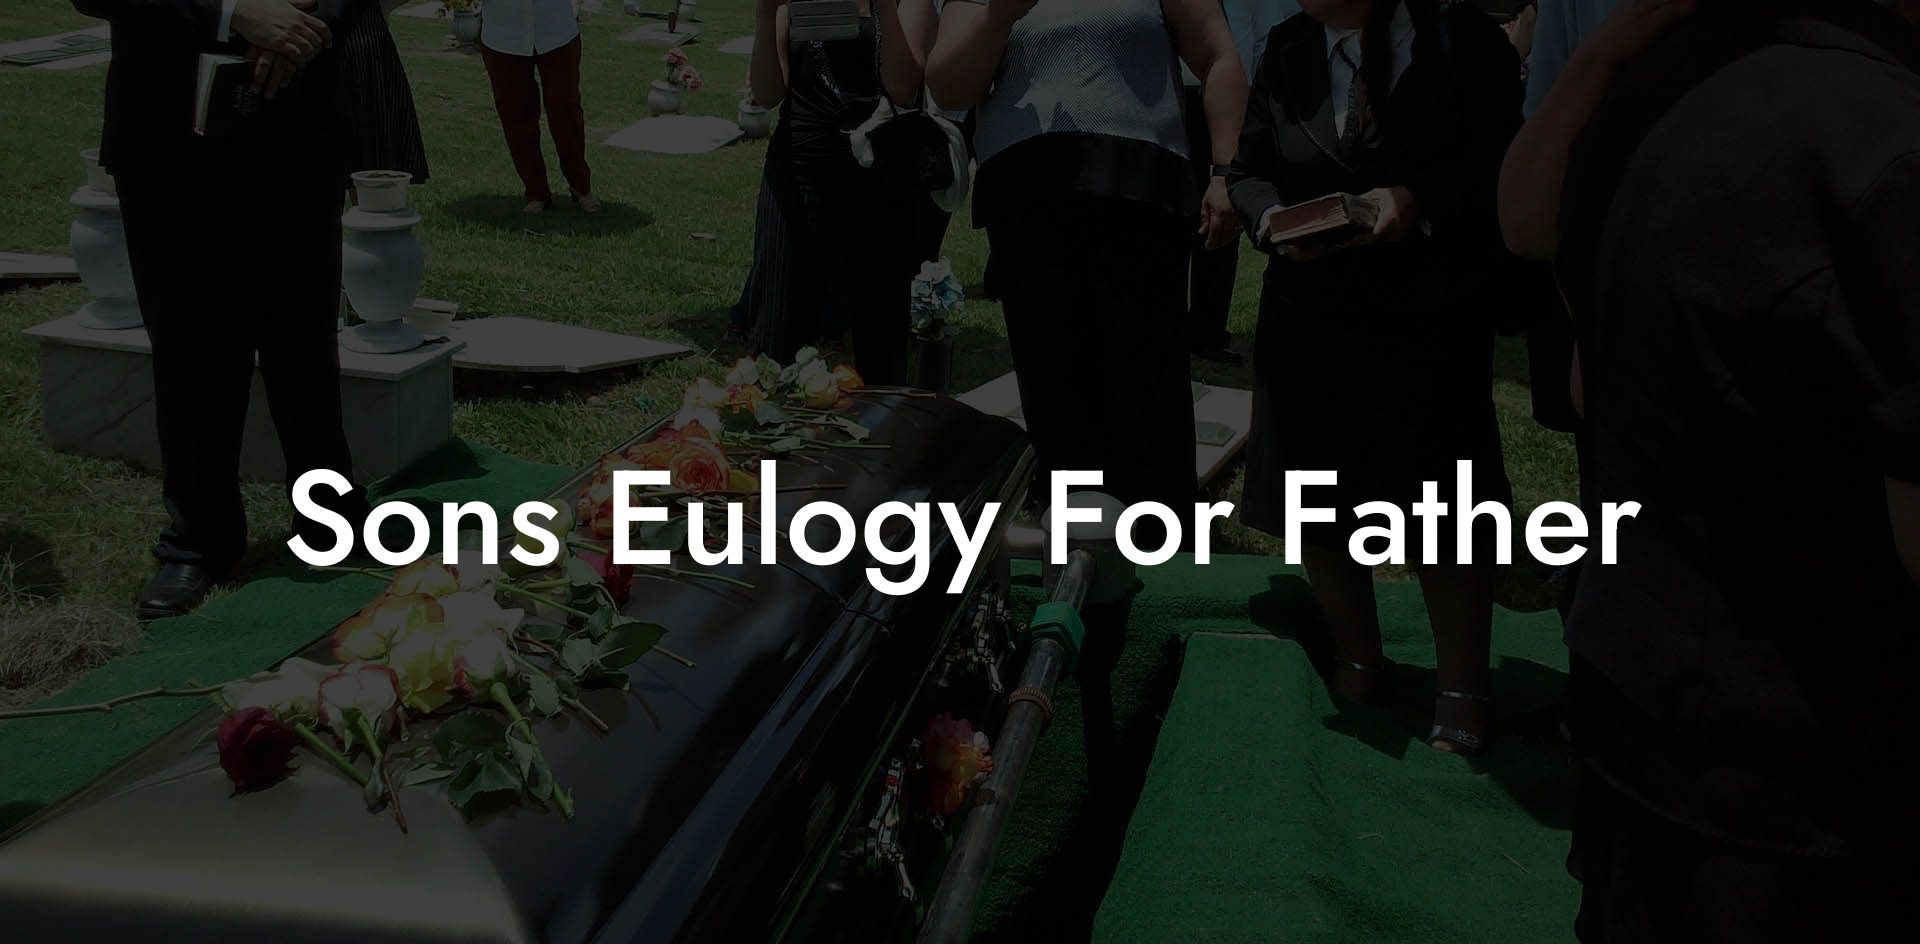 Sons Eulogy For Father